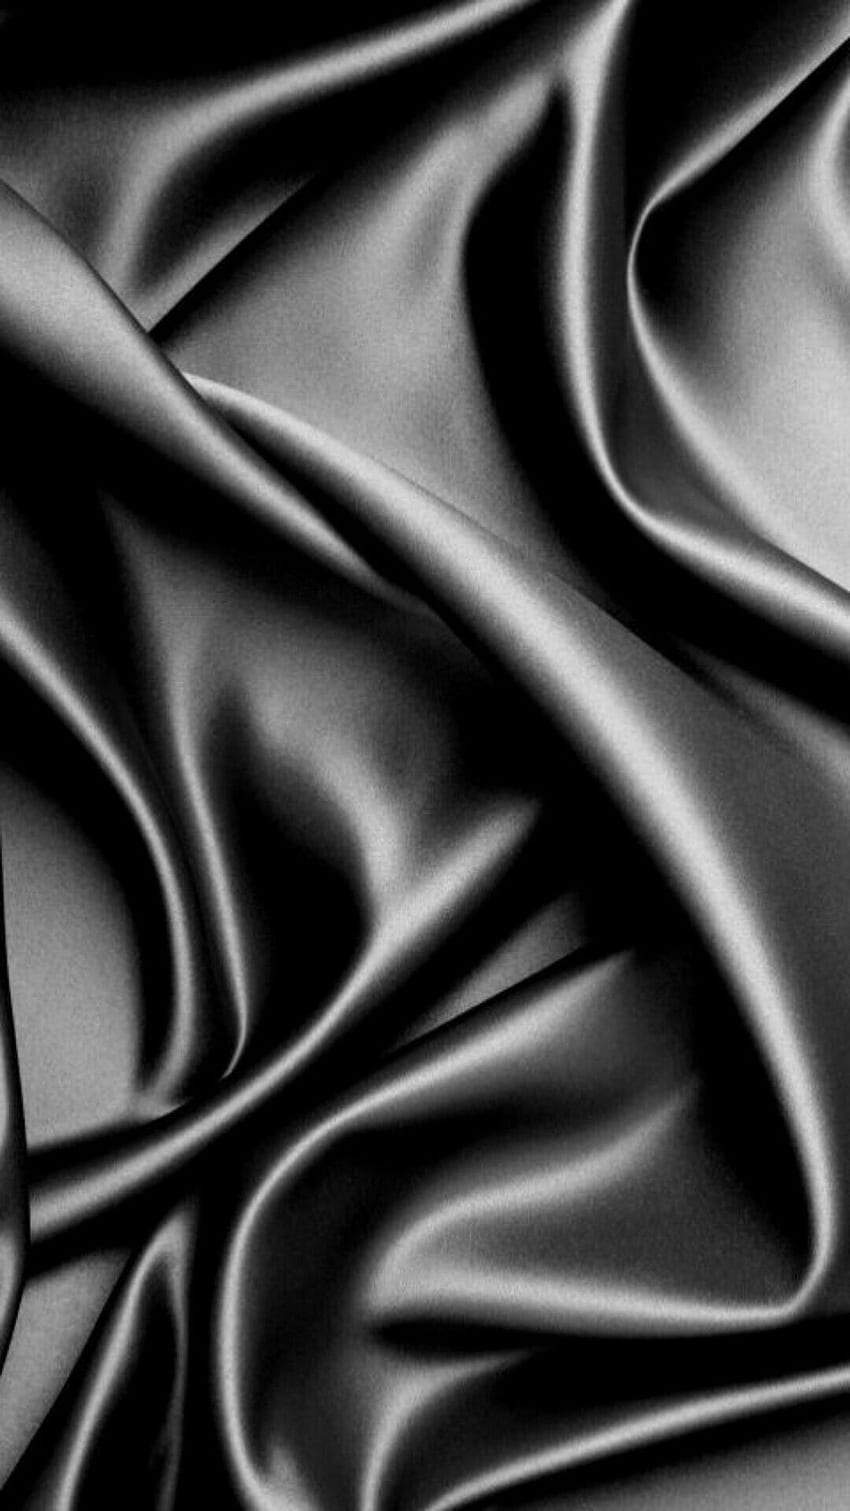 Black Silk iPhone 8 Wallpaper with high-resolution 1080x1920 pixel. You can use this wallpaper for your iPhone 8 Home Screen Background, iPhone 8 Lock Screen, iPhone 8 Wallpaper and another iPhone Models - Silk